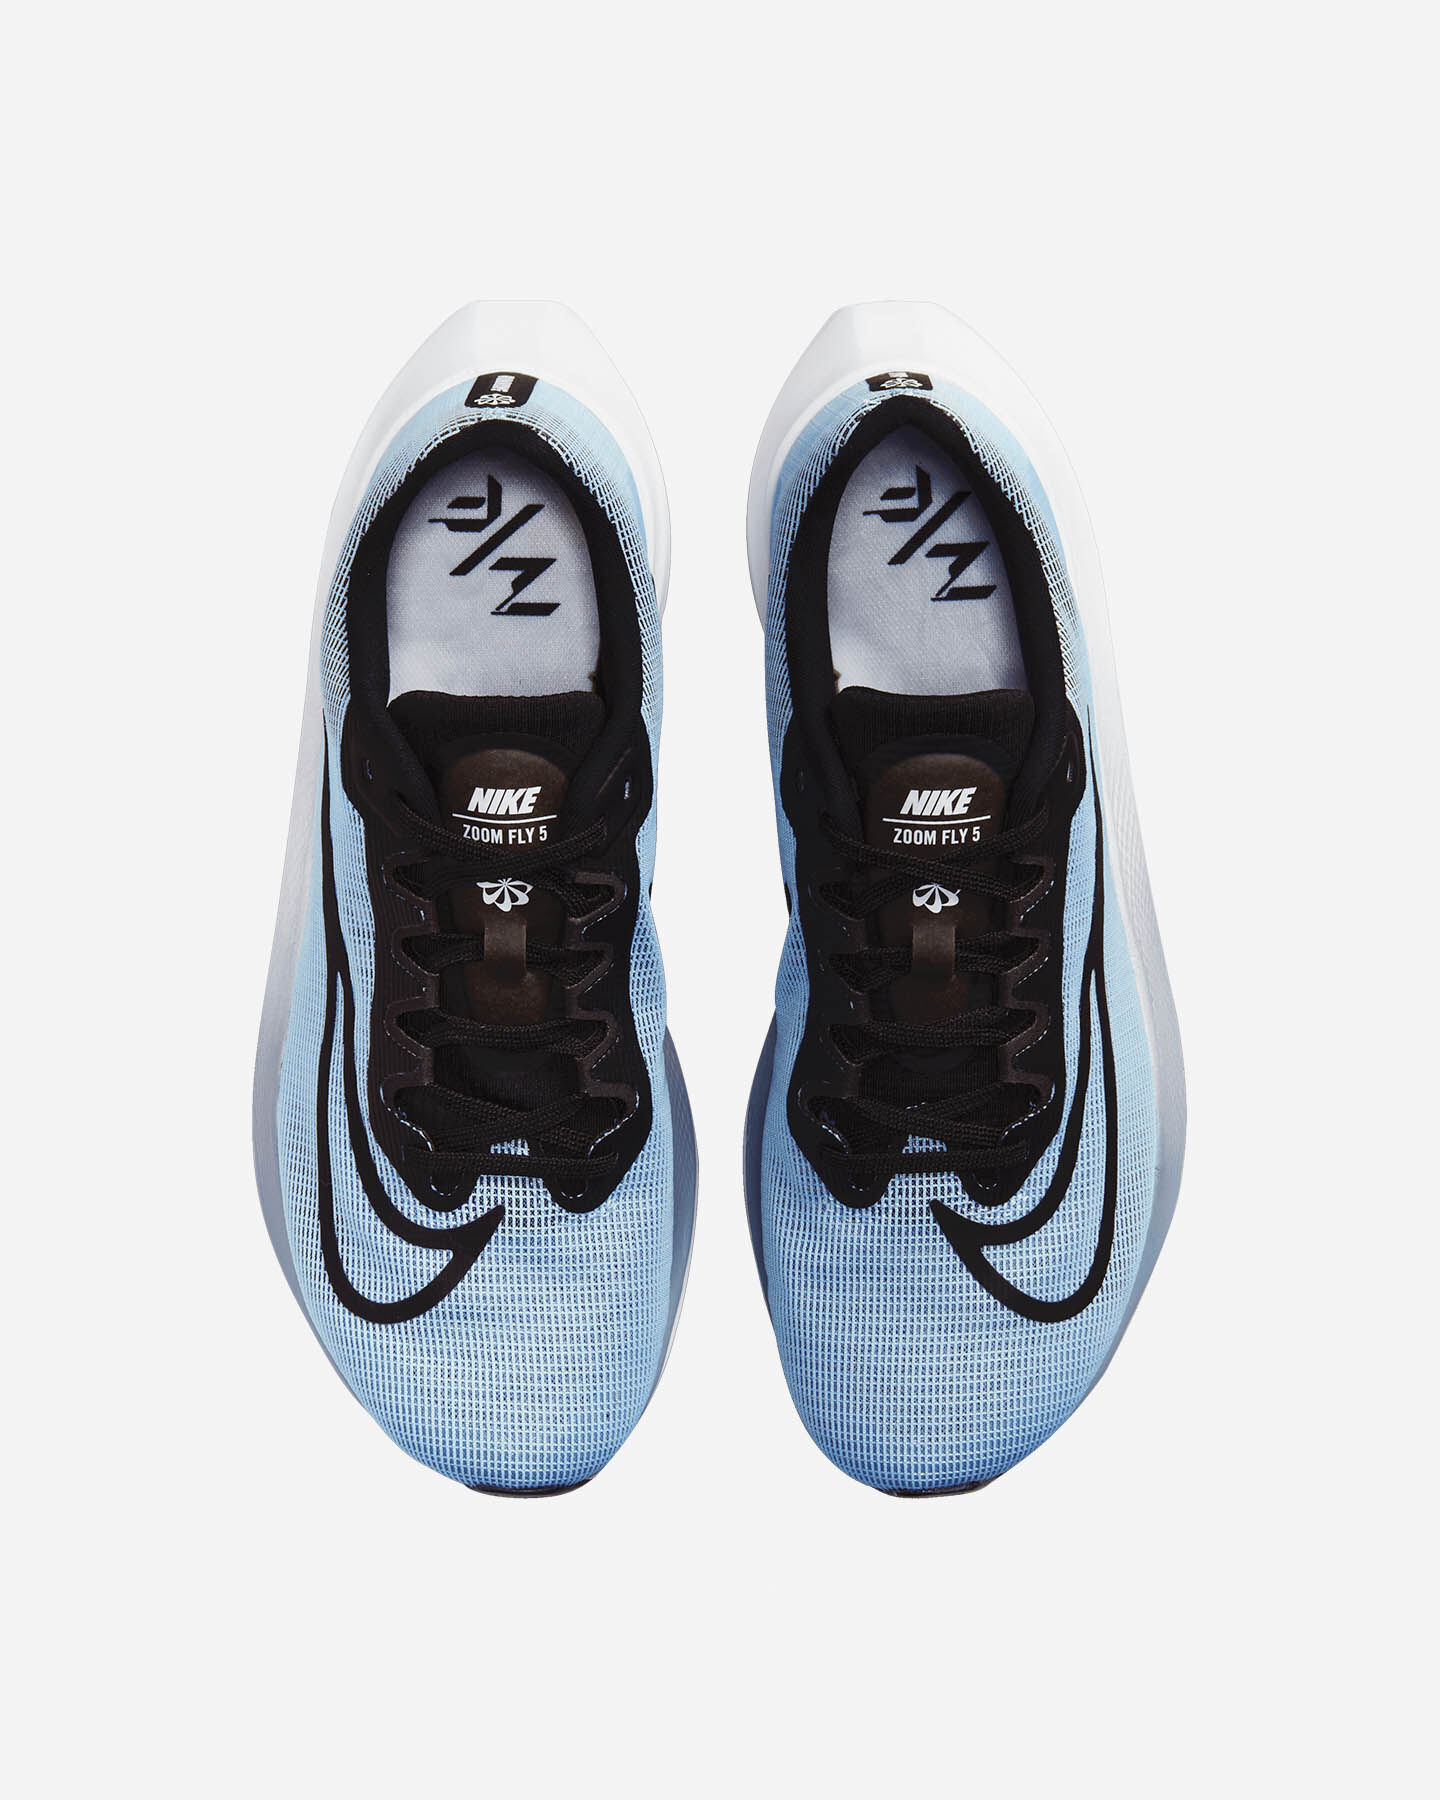  Scarpe running NIKE ZOOM FLY 5 M S5530554|401|6 scatto 3